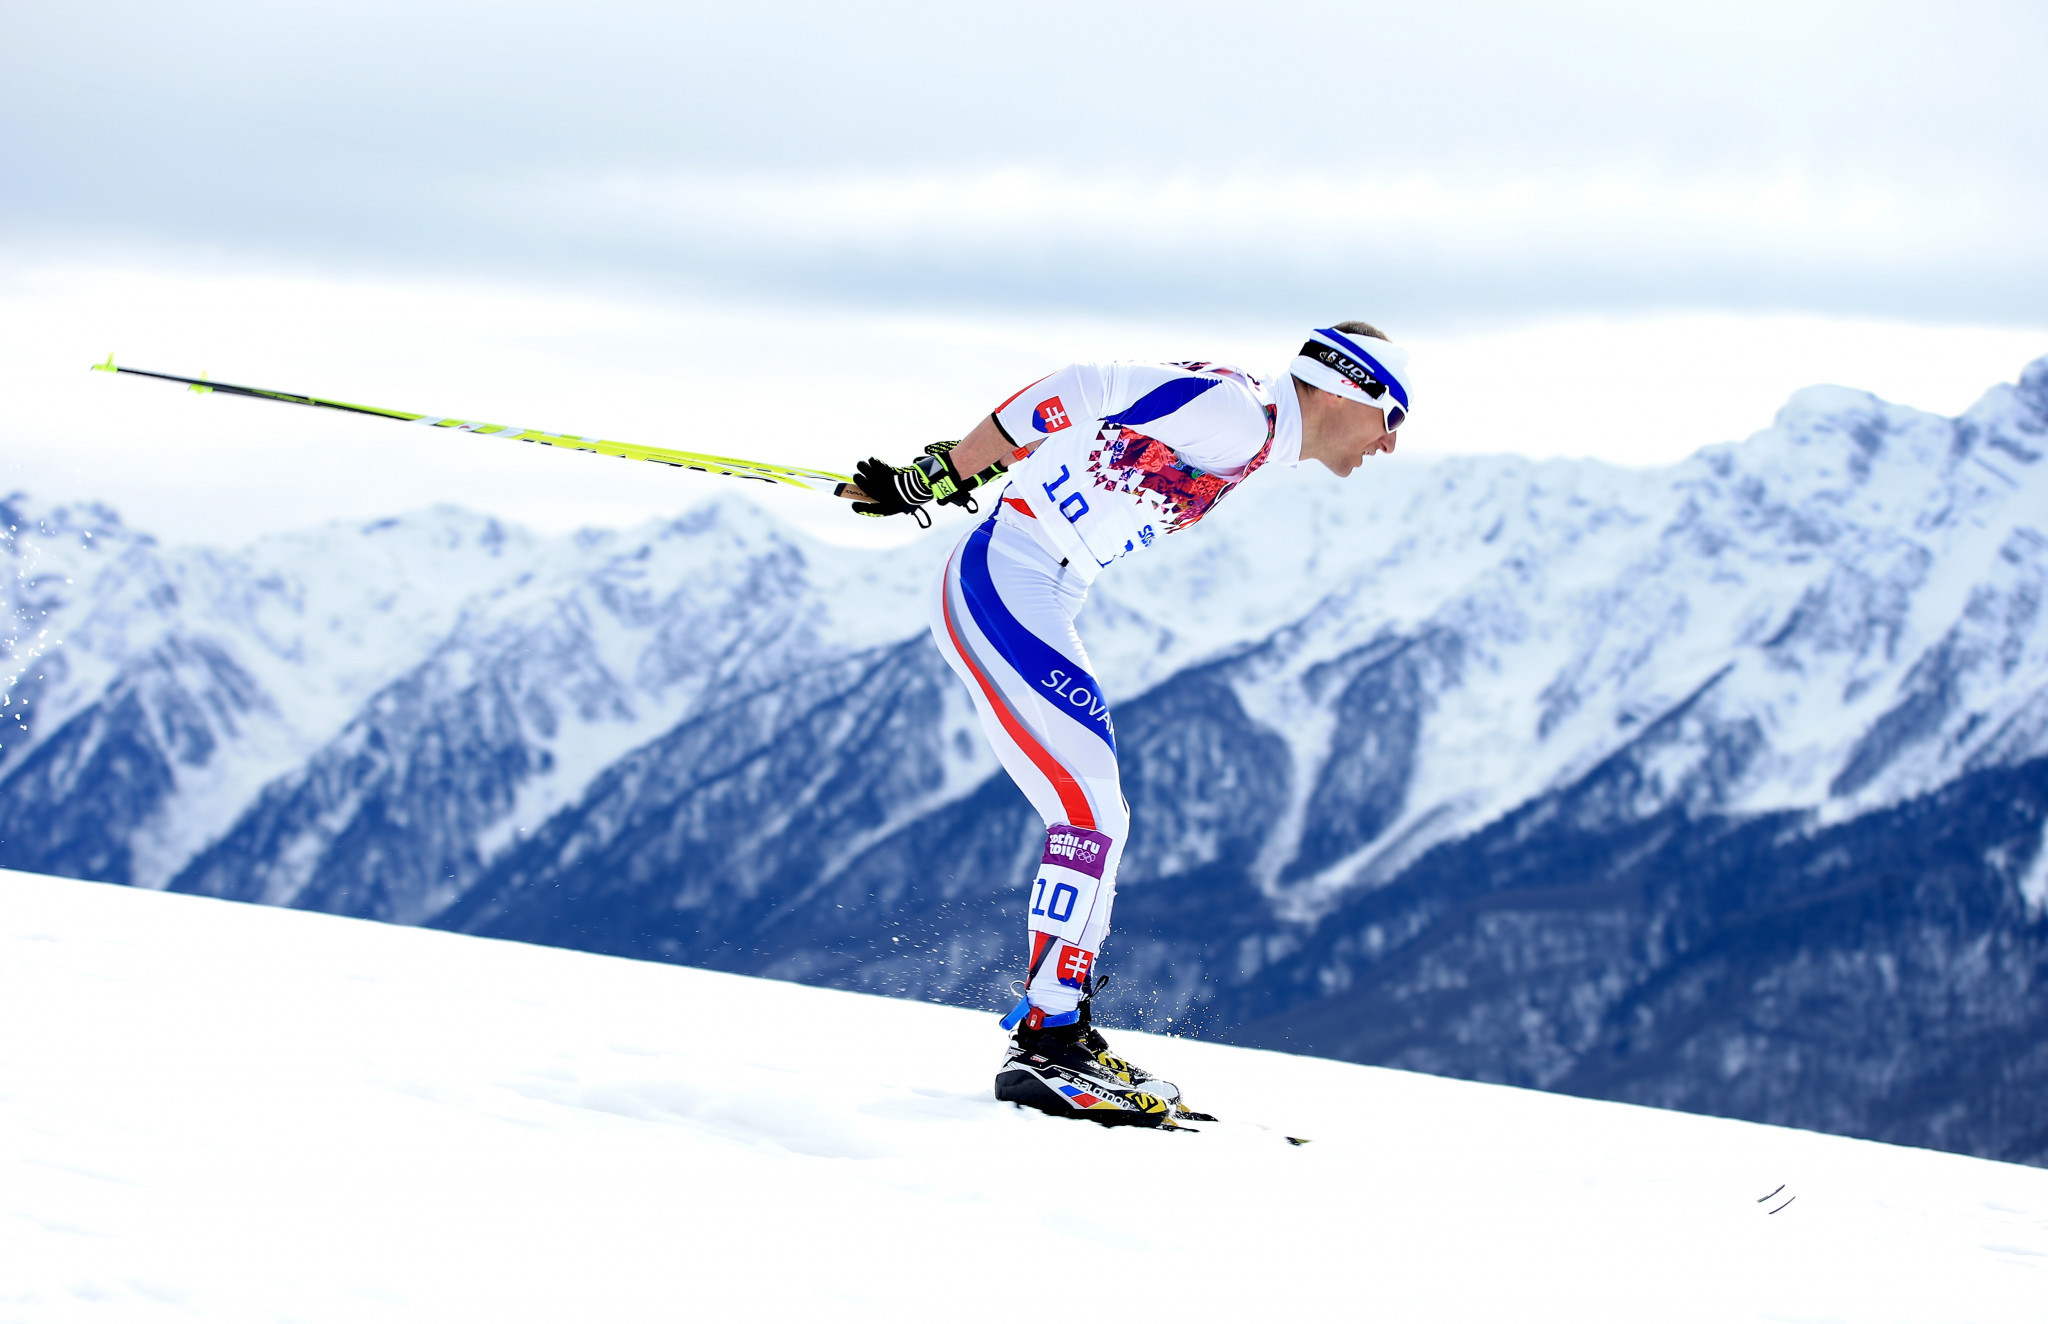 Five-time Winter Olympian Bajcicak lands cross-country skiing coaching role in Poland